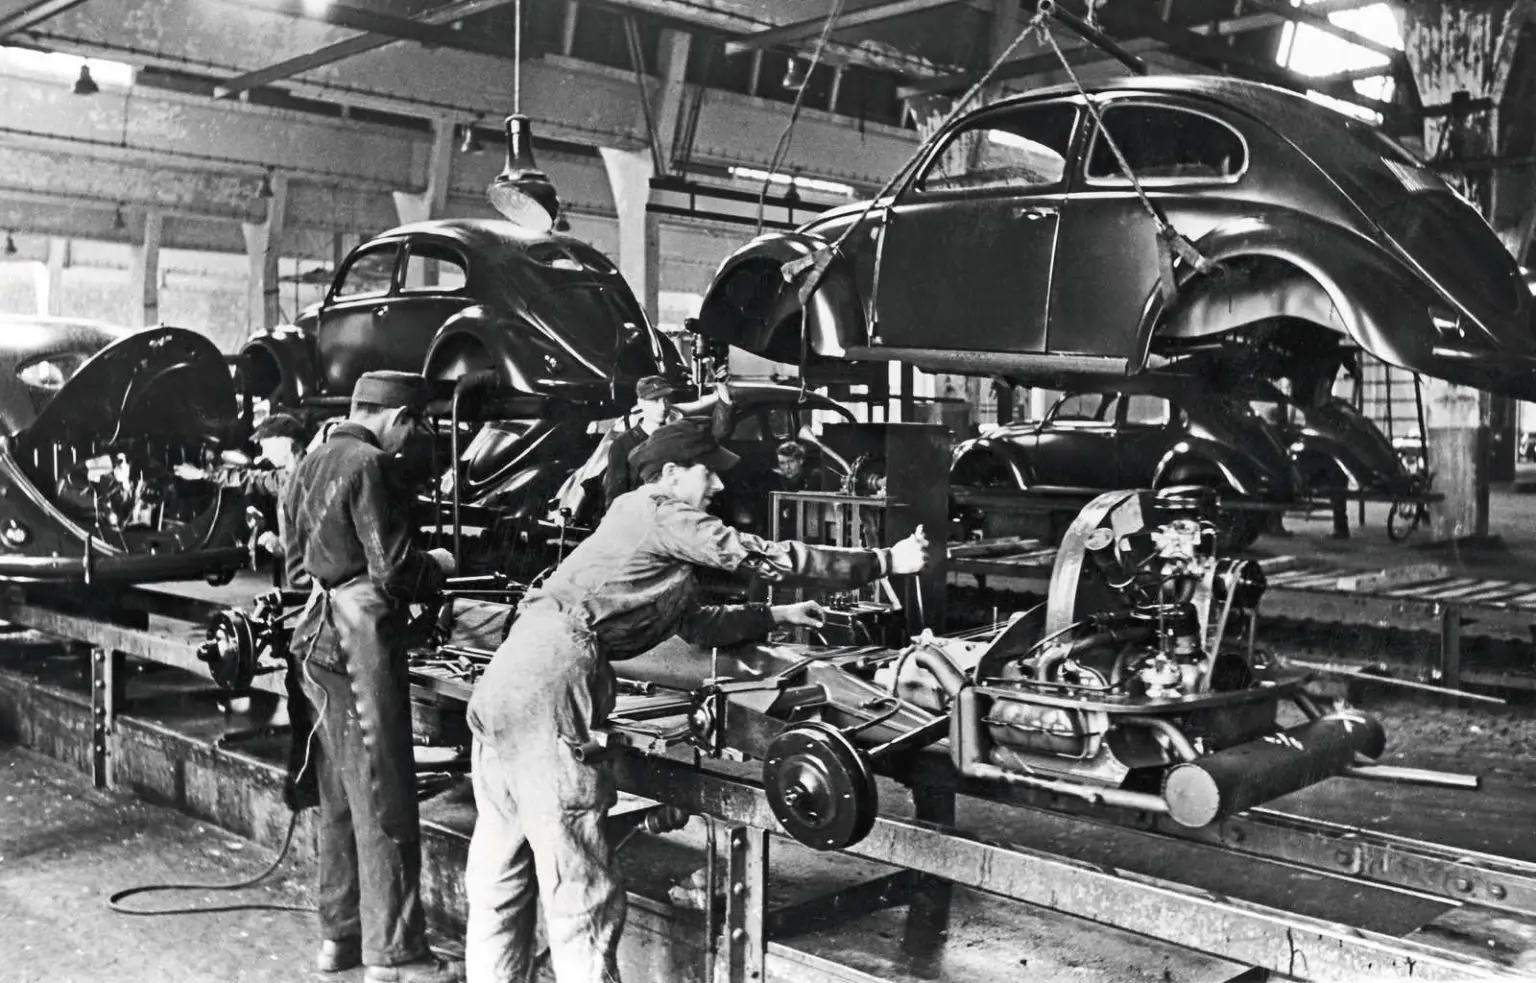 Production Of The Volkswagen Beetle Started 75 Years Ago In Wolfsburg